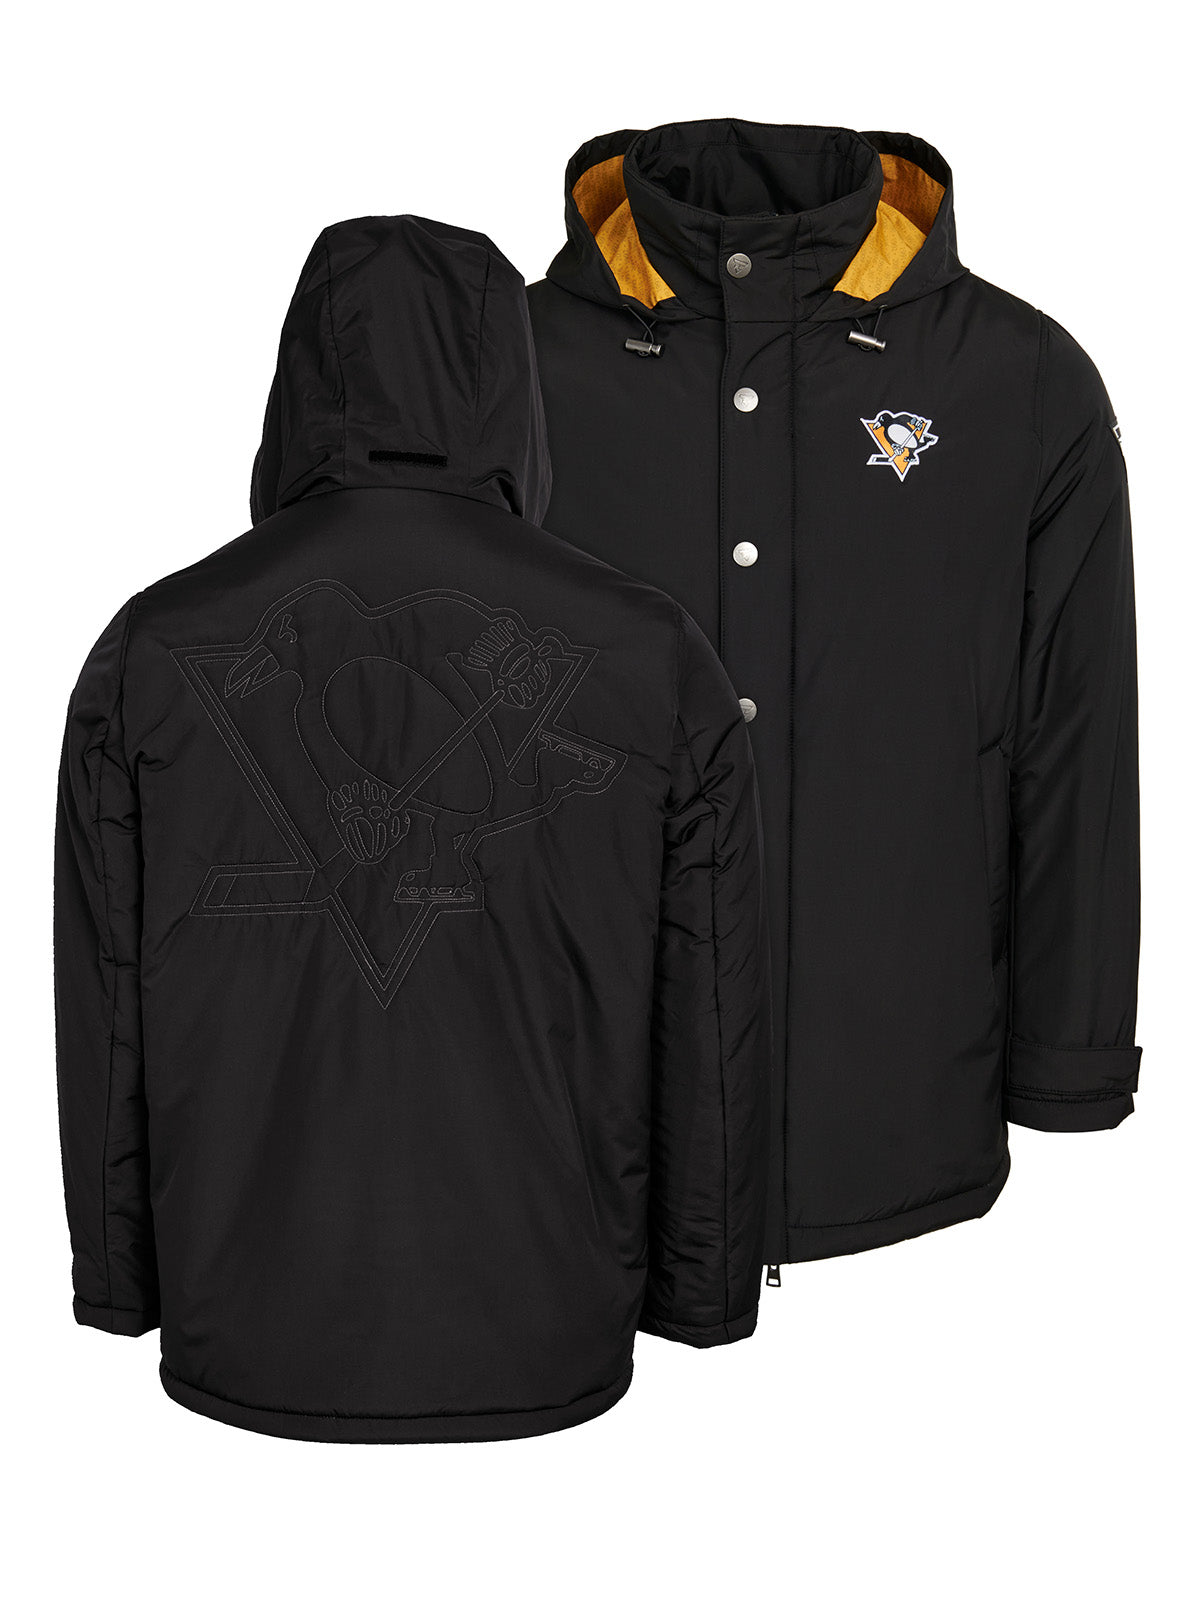 Pittsburgh Penguins Coach's Jacket - The jacket features a quilted stitch of the Pittsburgh Penguins logo centered on the back and has a removal hood in the team colors, elevating this NHL hockey clothing collection